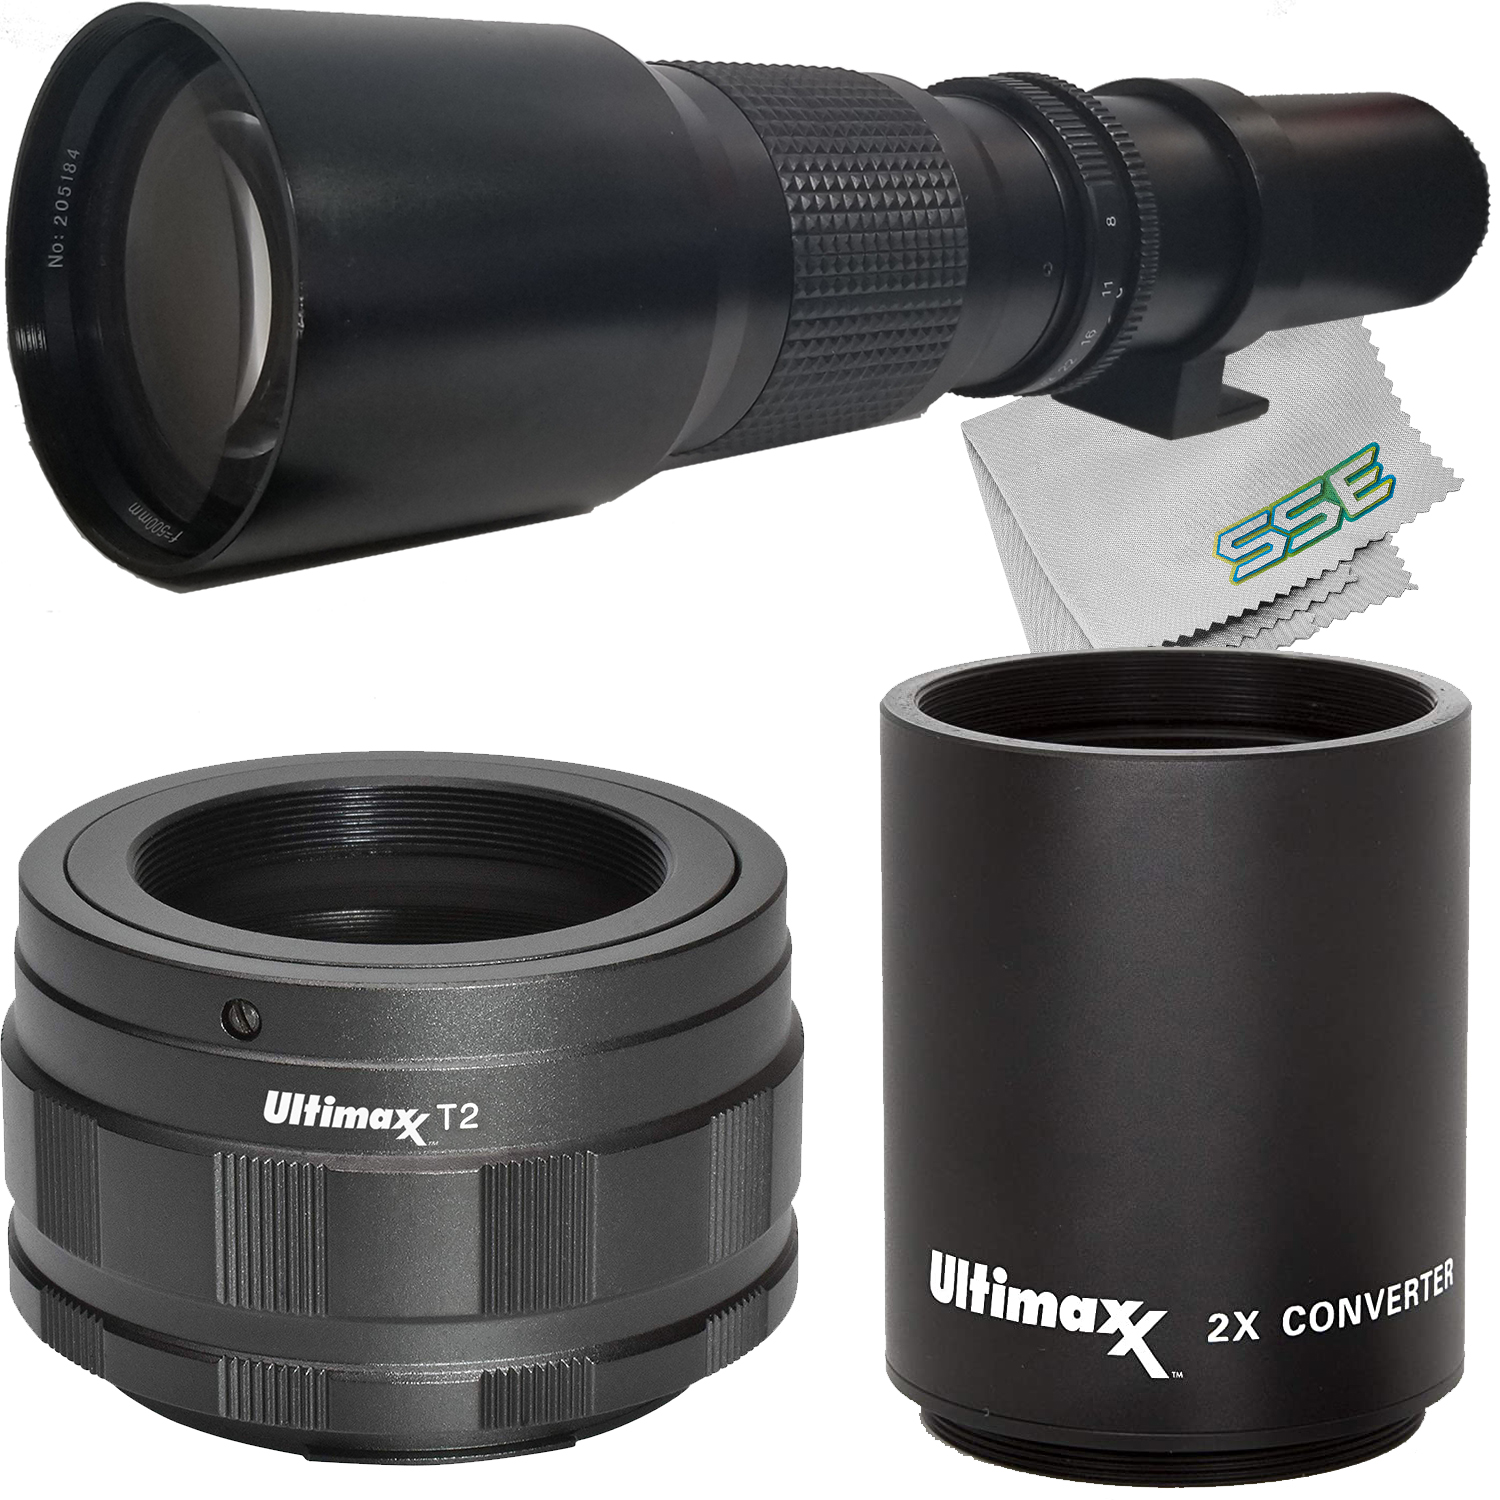 Ultimaxx 500mm f/8 Preset Telephoto Lens for Nikon Z7 Z7II Z6 Z6II Z5 Z50 Mirrorless Camera & Other Z-Mount Cameras with Basic Accessory Bundle - Includes: 2x Converter for T-Mount Lenses & More - image 1 of 6